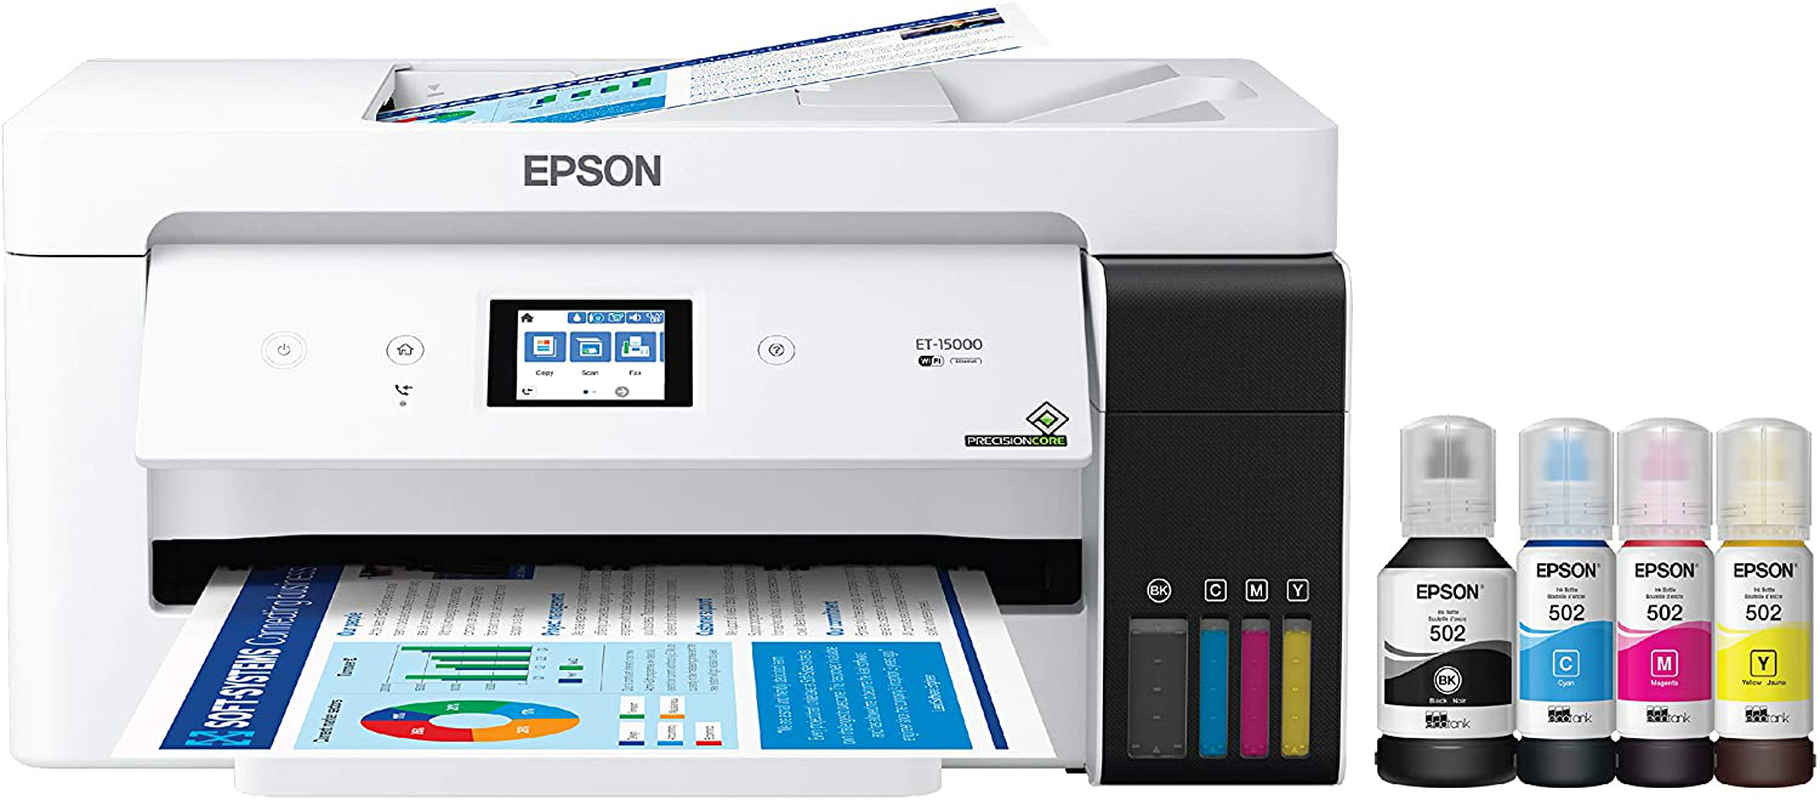 Epson Ecotank Et 2760 Wireless Color All In One Cartridge Free Supertank Printer With Scanner 9884